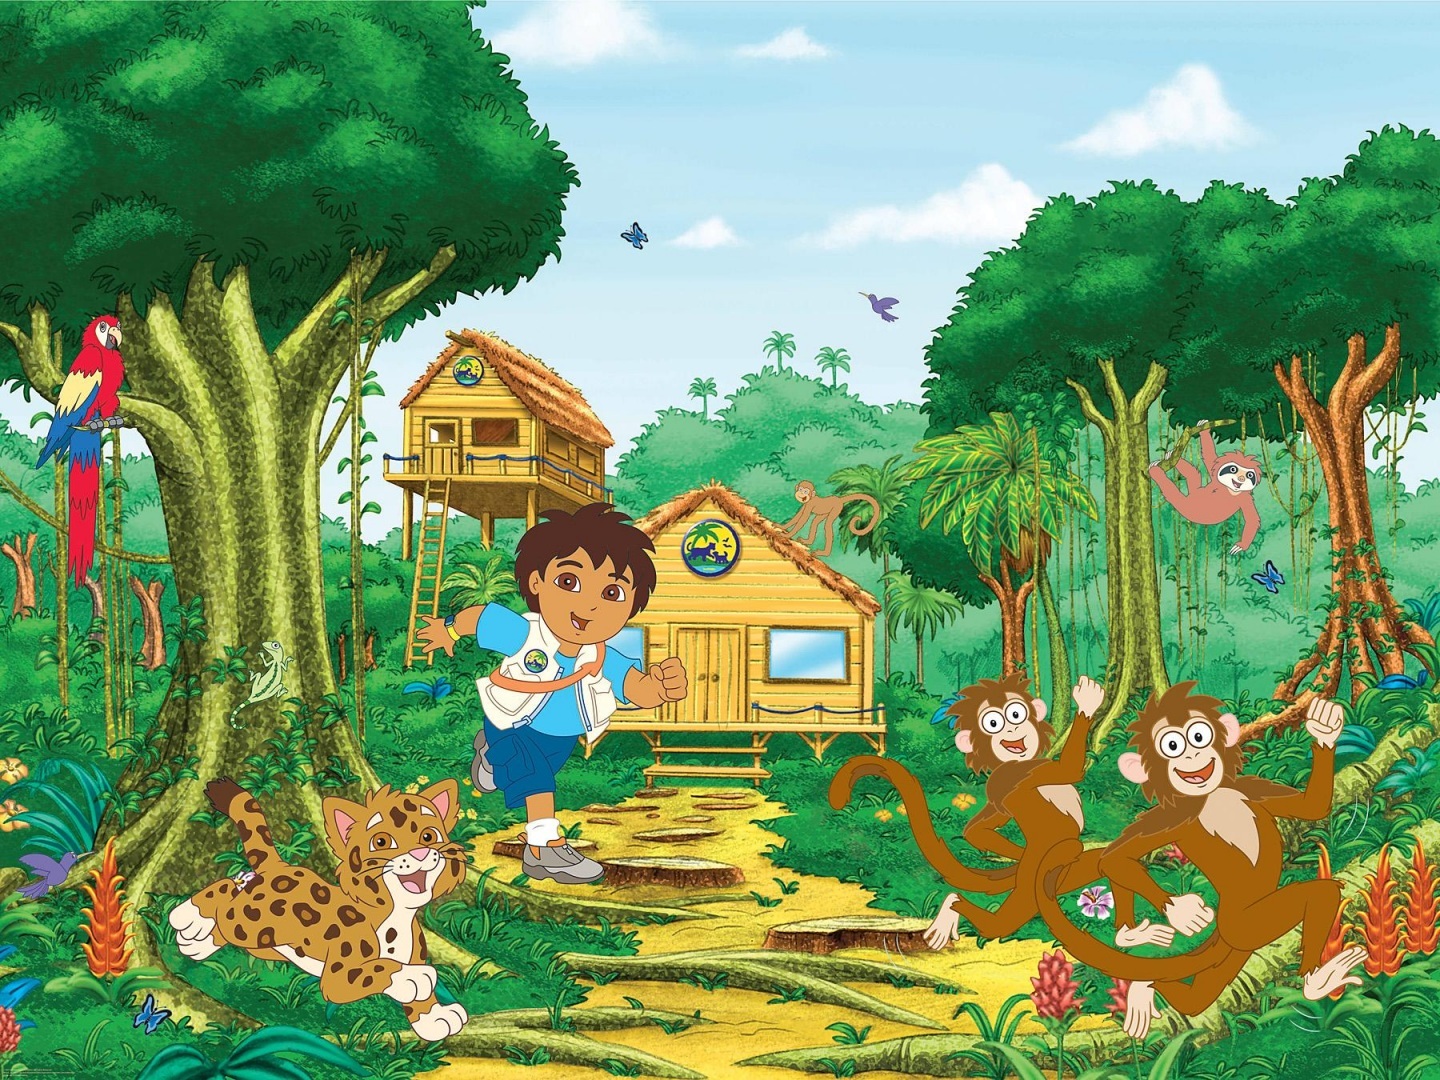 Go Diego Wall Mural Nickelodeon S To Jacklyn31